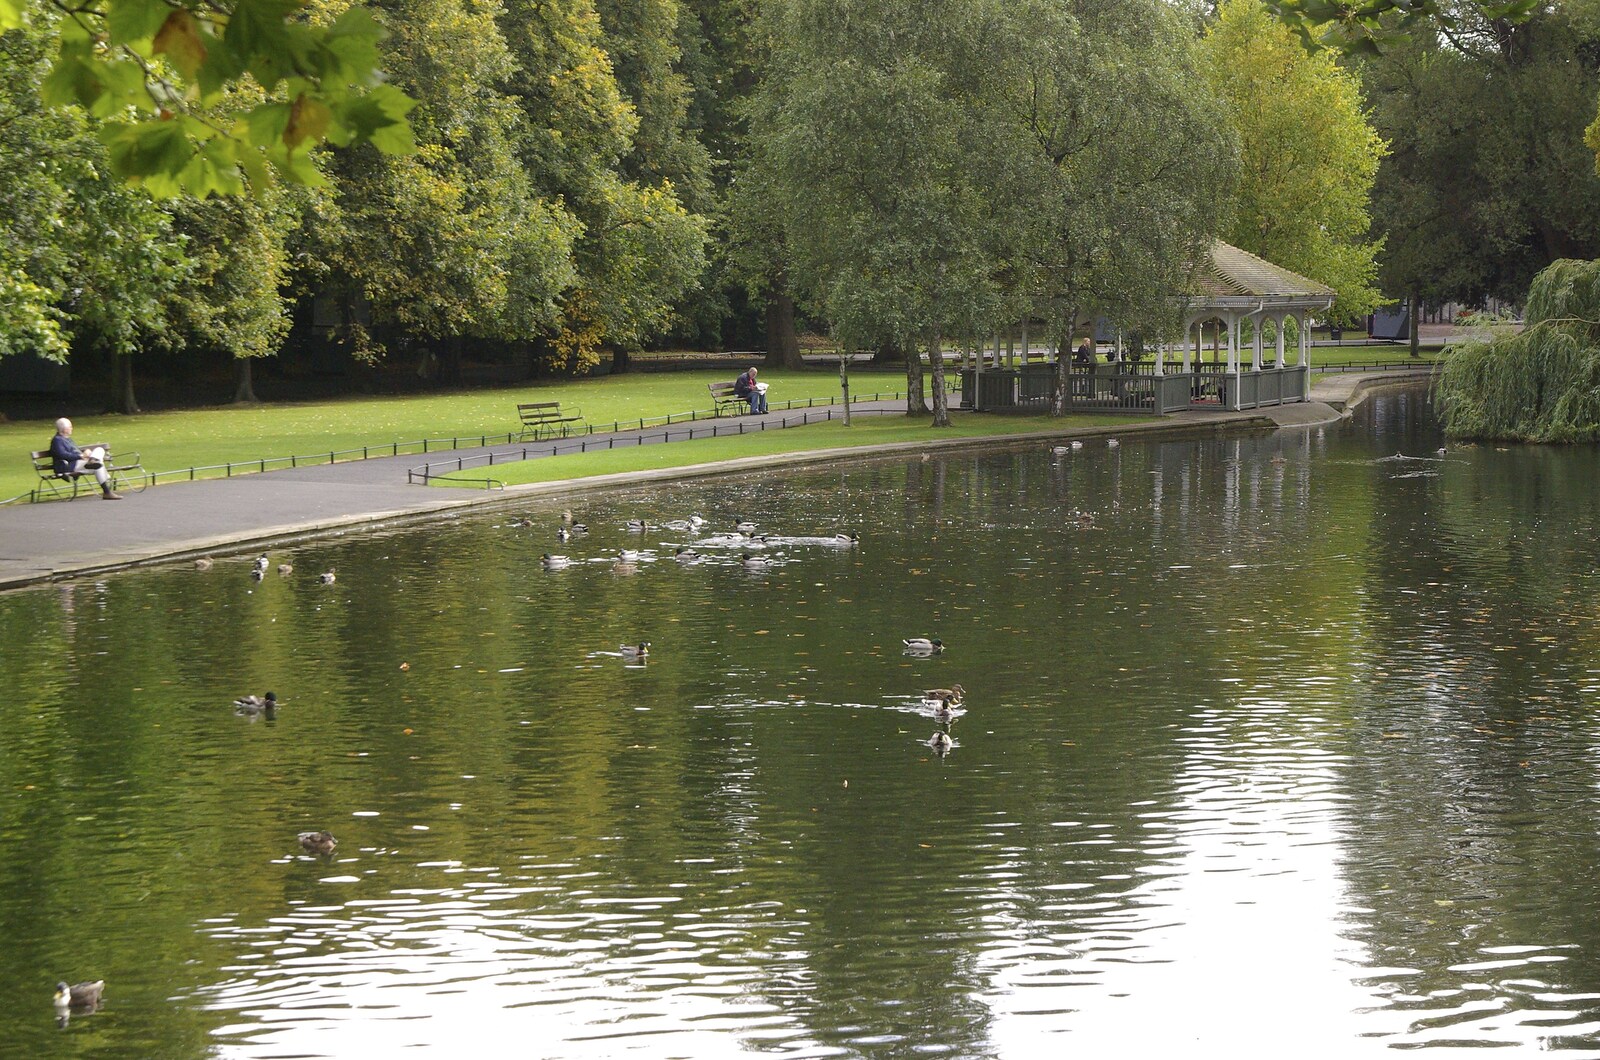 Blackrock and Dublin, Ireland - 24th September 2007: A pond in the park